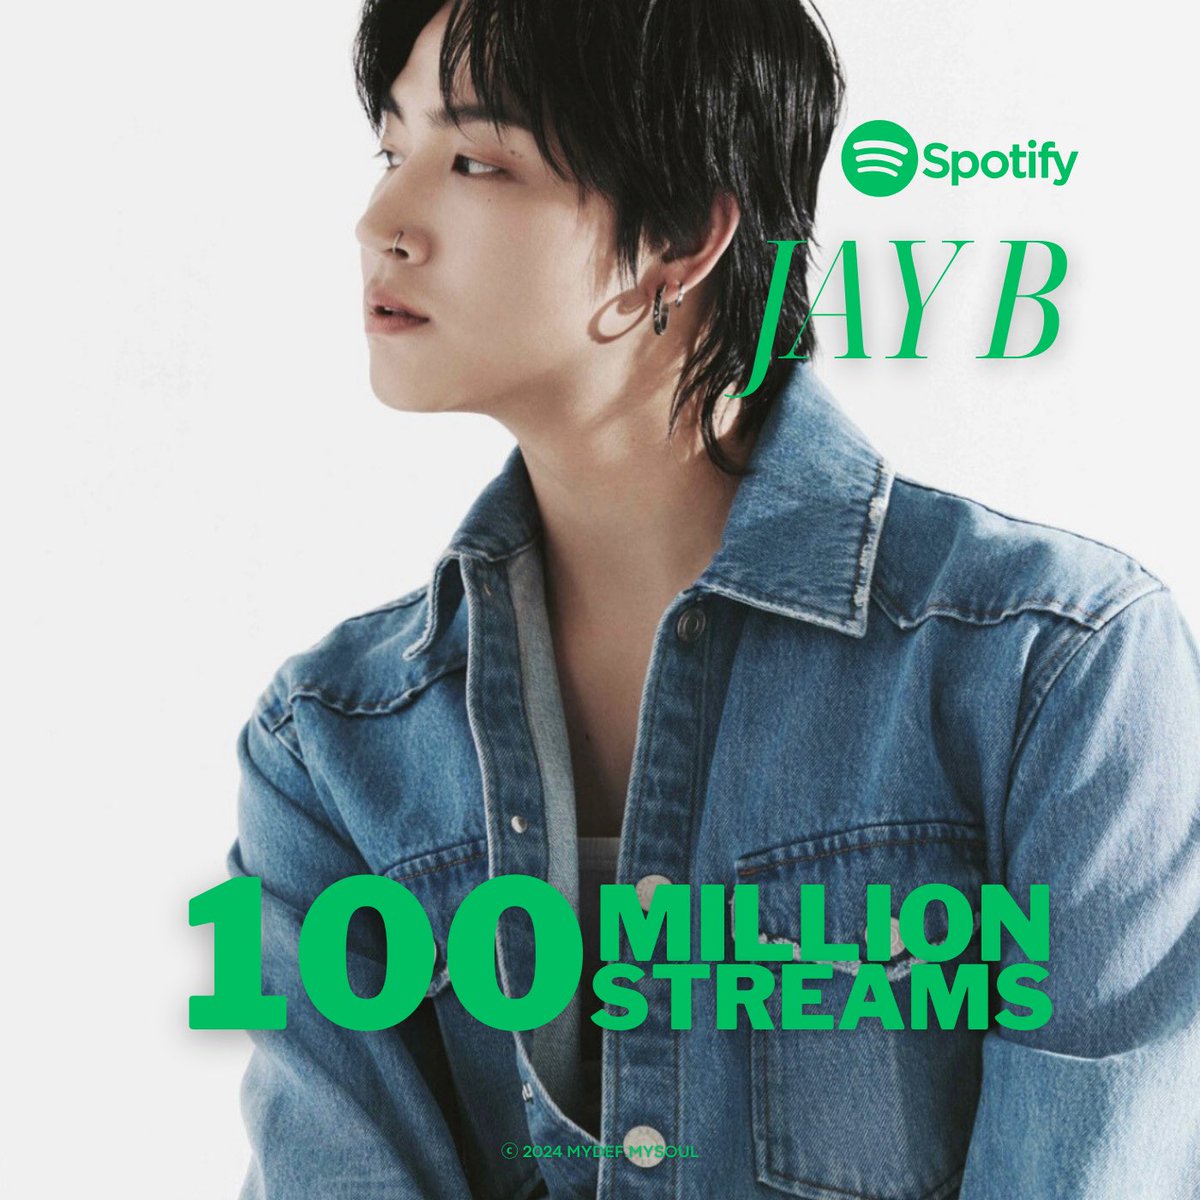 The goal JAY B's 100 million streams on Spotify have been achieved. Thank you to everyone who has always supported every part of Jaebeom's music together. Let's keep sending love to other songs as well 🫶🏻🎶 🔜Def. 30M streams 🎯Def. 100M streams @jaybnow_hr #JAYB #Def #제이비